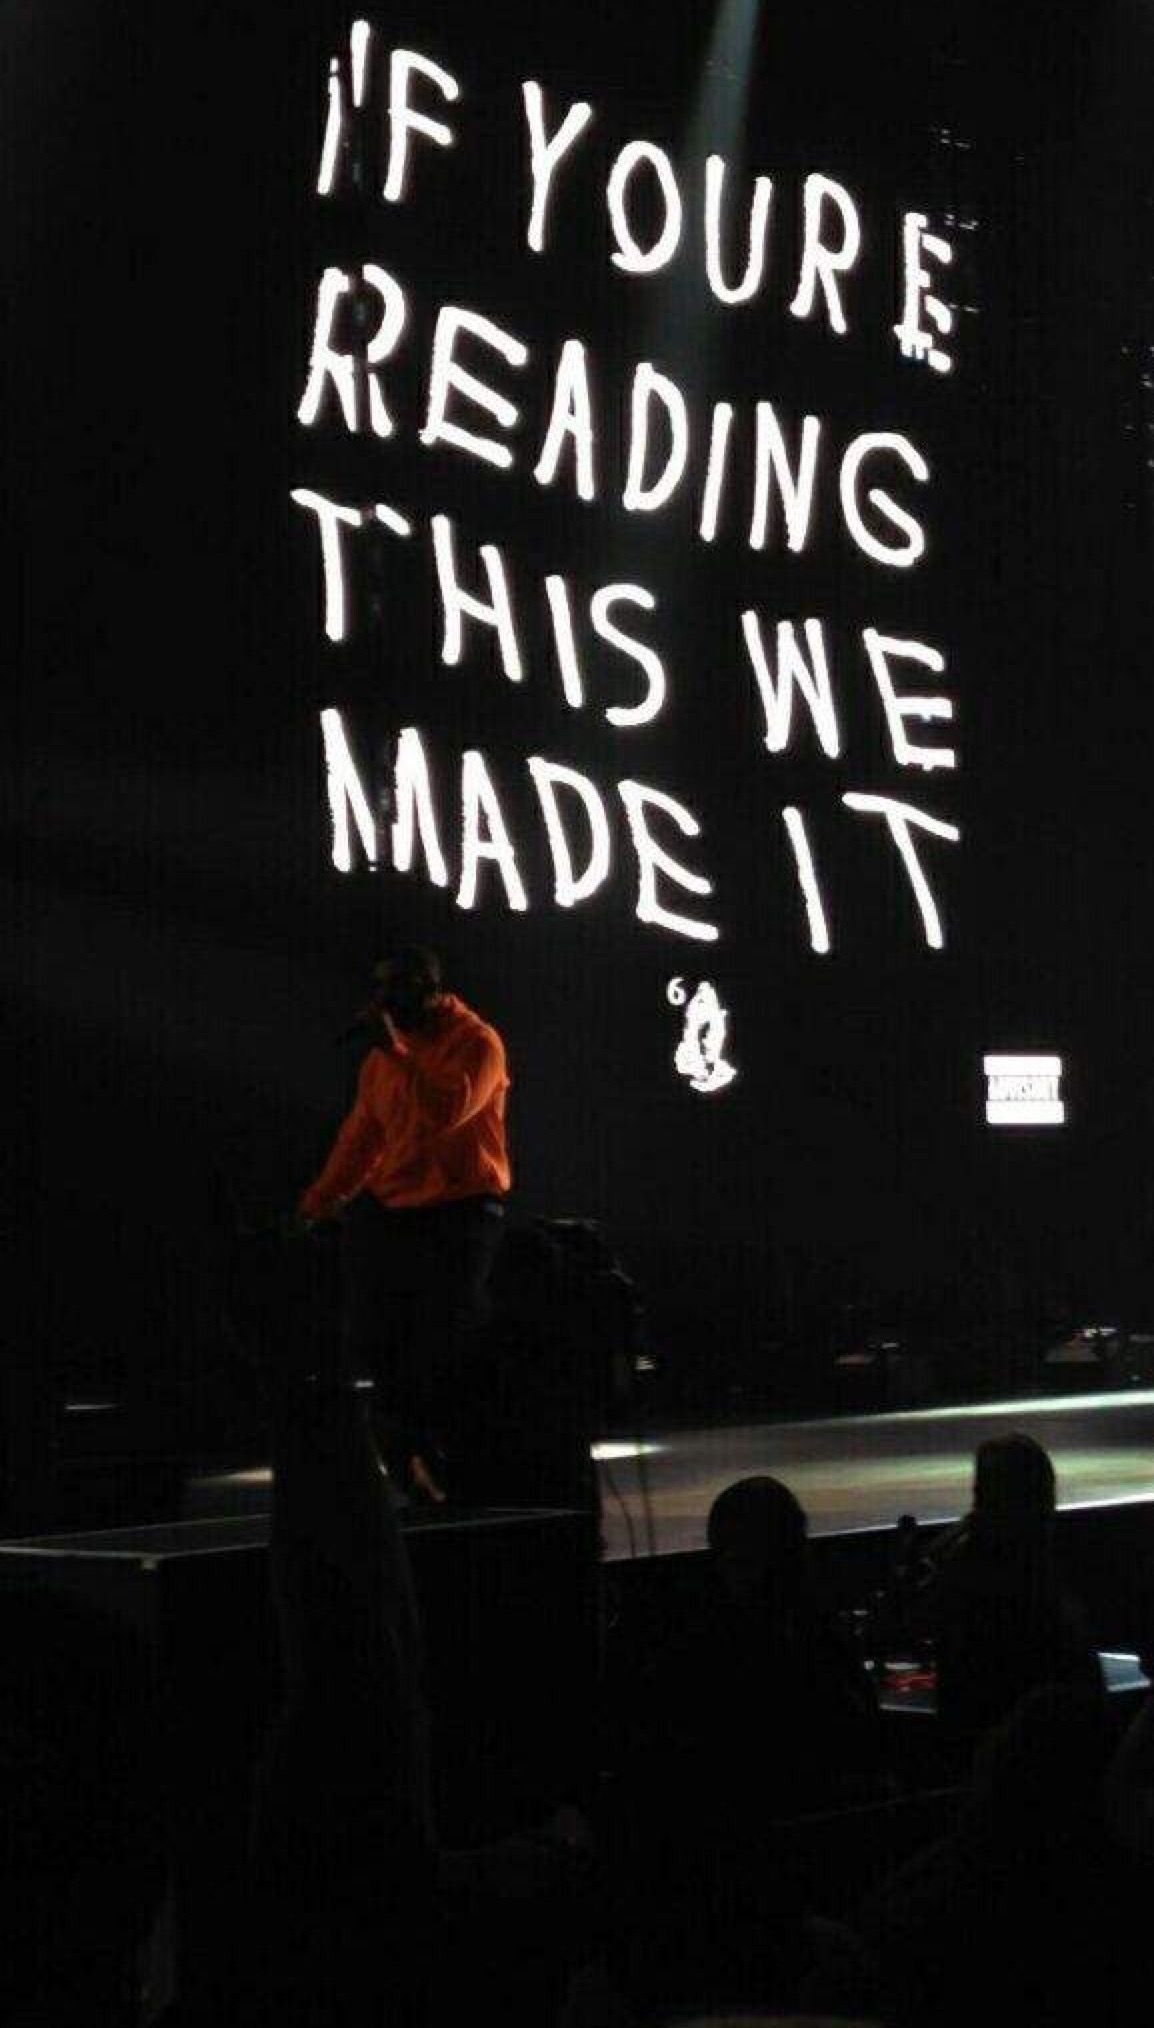 A man is standing on stage with his back to the audience - Drake